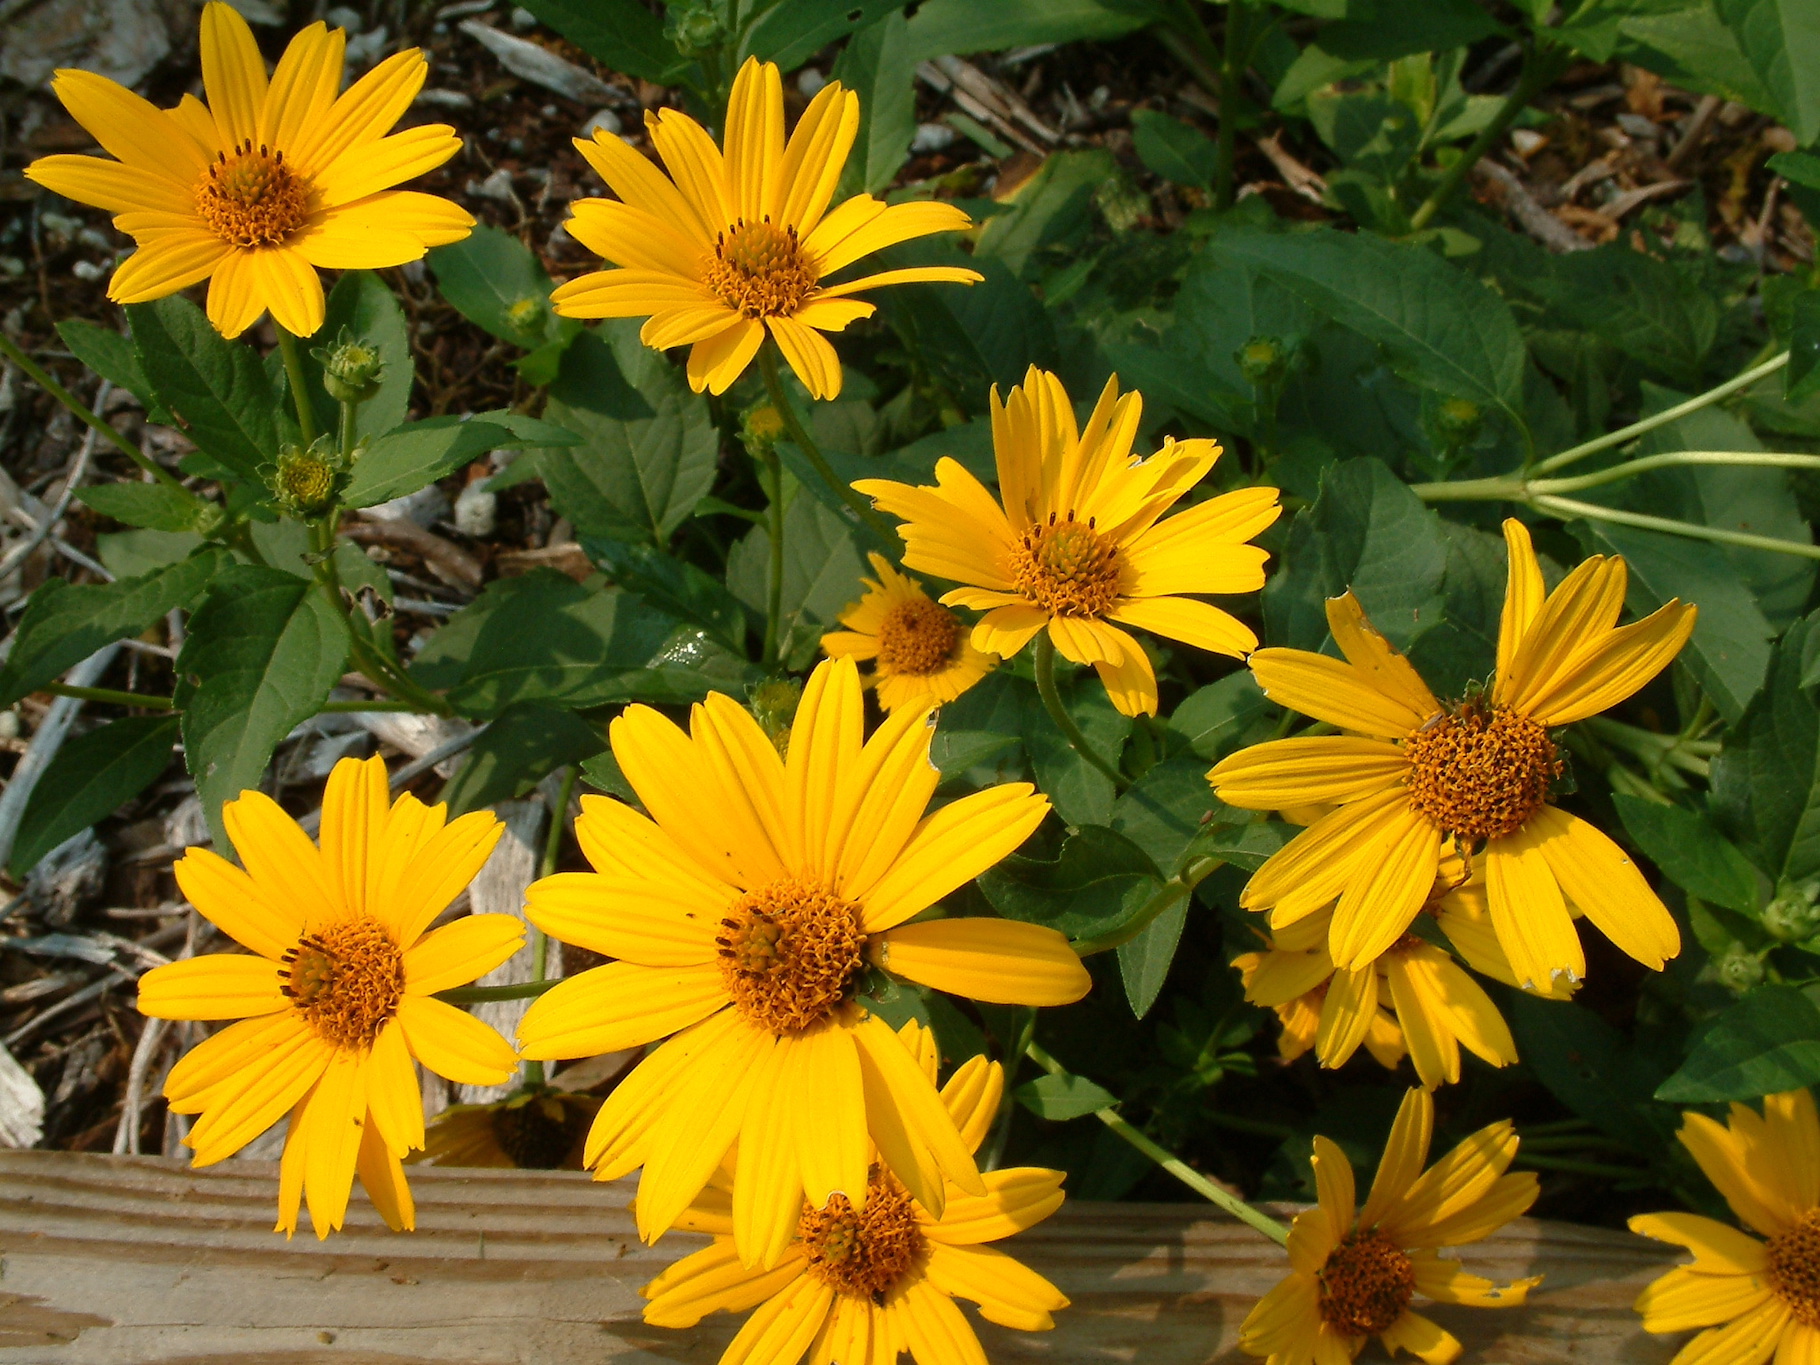 The Scientific Name is Heliopsis helianthoides var. helianthoides. You will likely hear them called Eastern Oxeye, Eastern Sunflower-everlasting, Smooth Oxeye, . This picture shows the  of Heliopsis helianthoides var. helianthoides